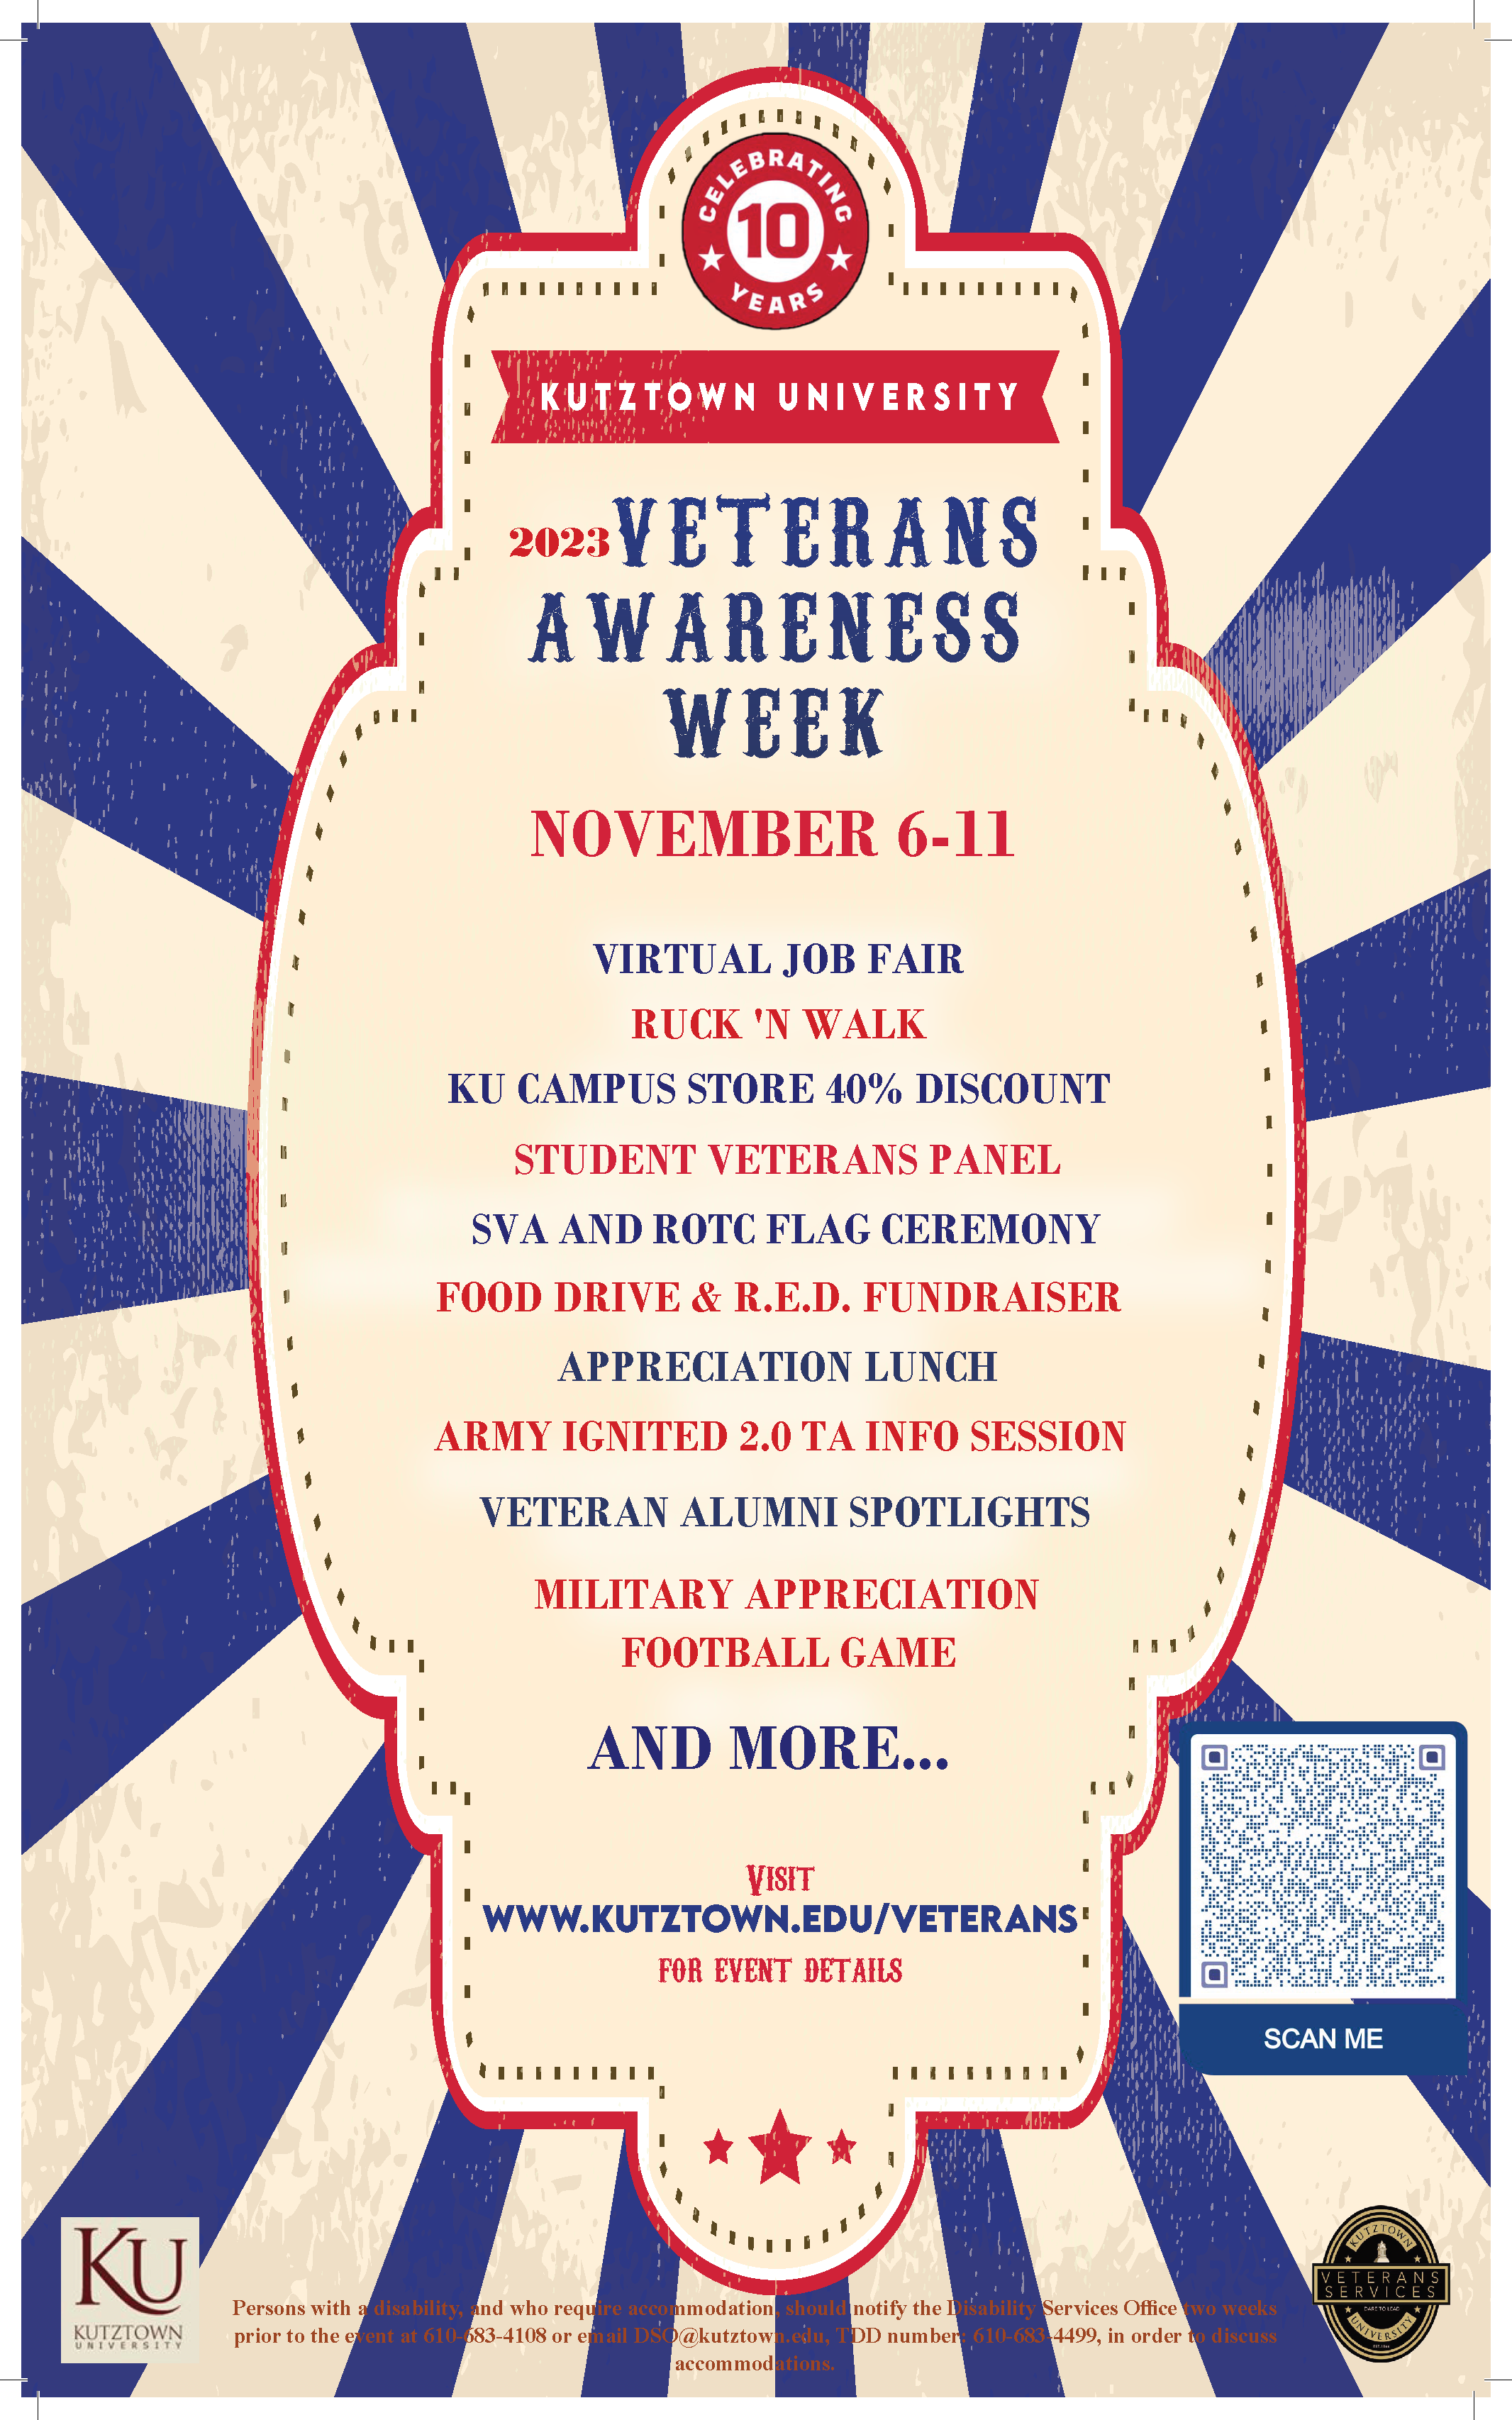 carnival themed poster with event activities for veterans awareness week